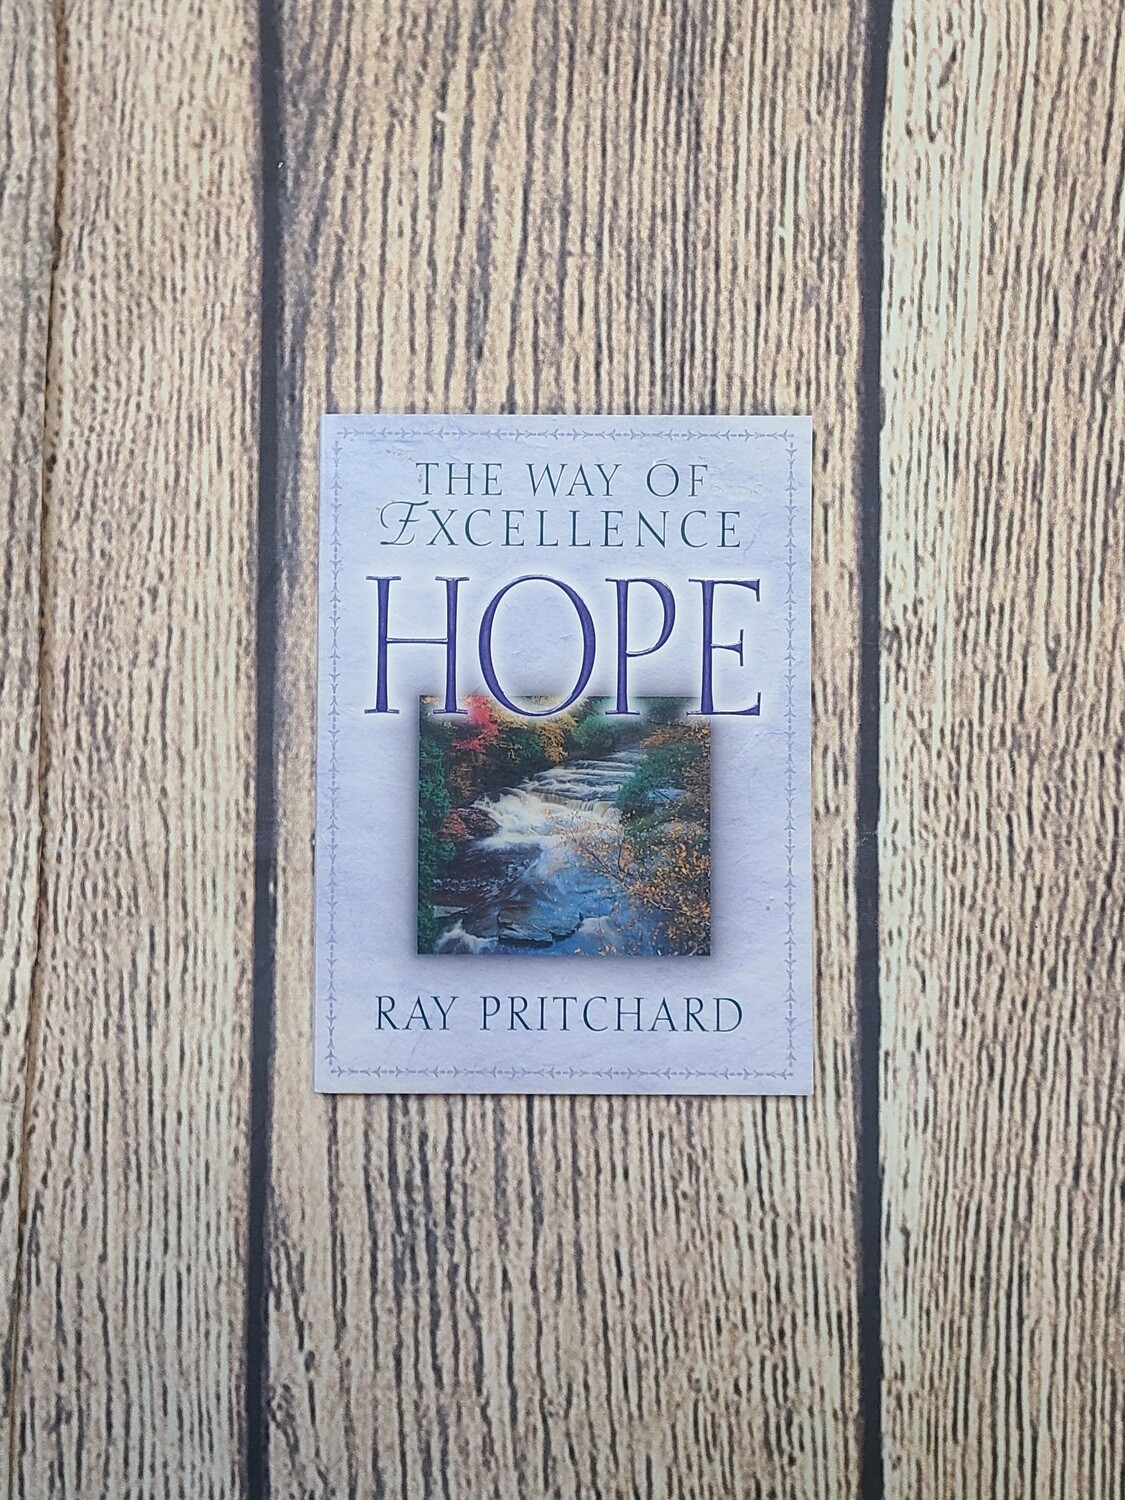 The Way of Excellence Hope by Ray Pritchard